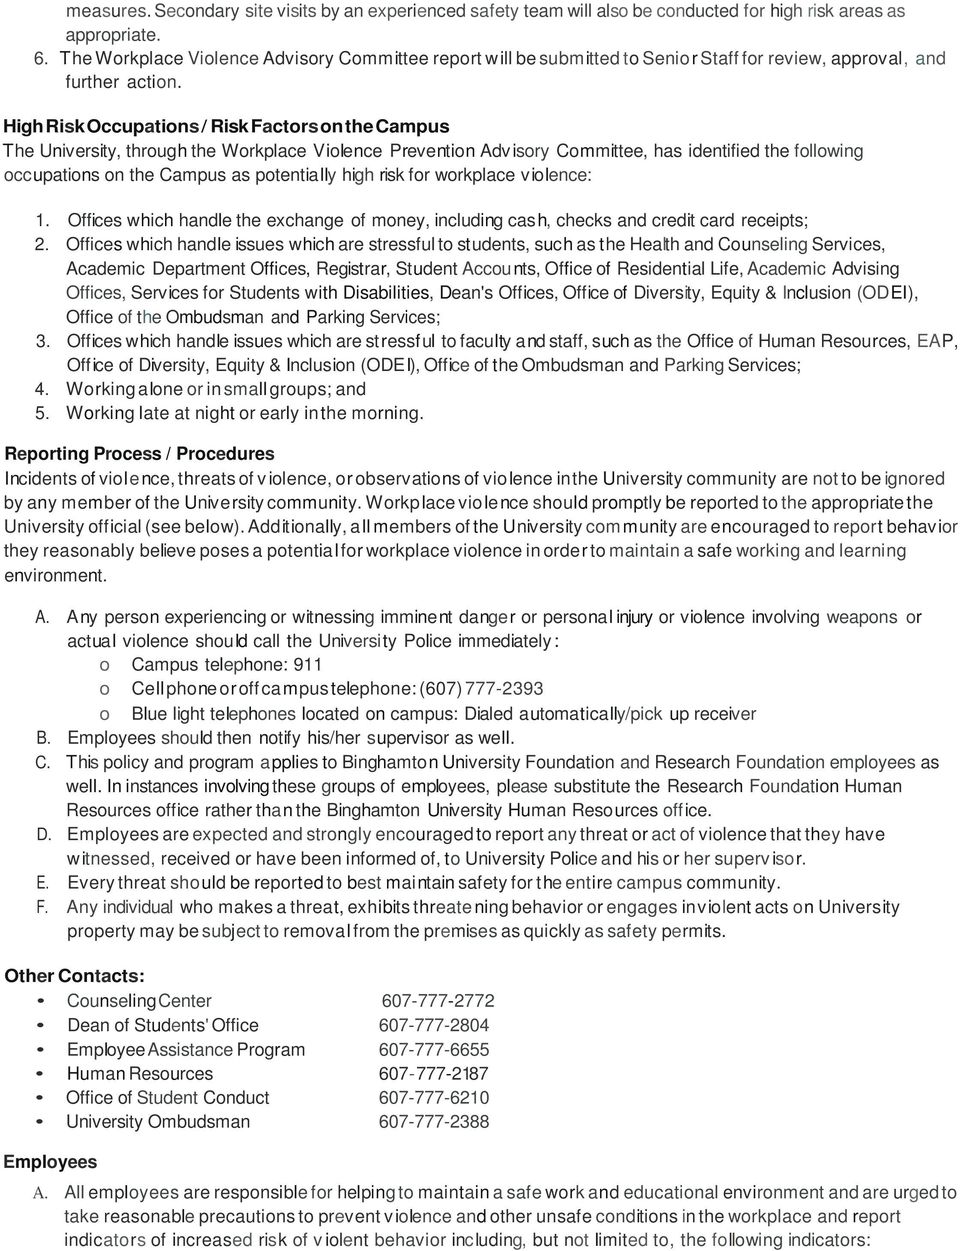 High Risk Occupations / Risk Factors on the Campus The University, through the Workplace Violence Prevention Advisory Committee, has identified the following occupations on the Campus as potentially